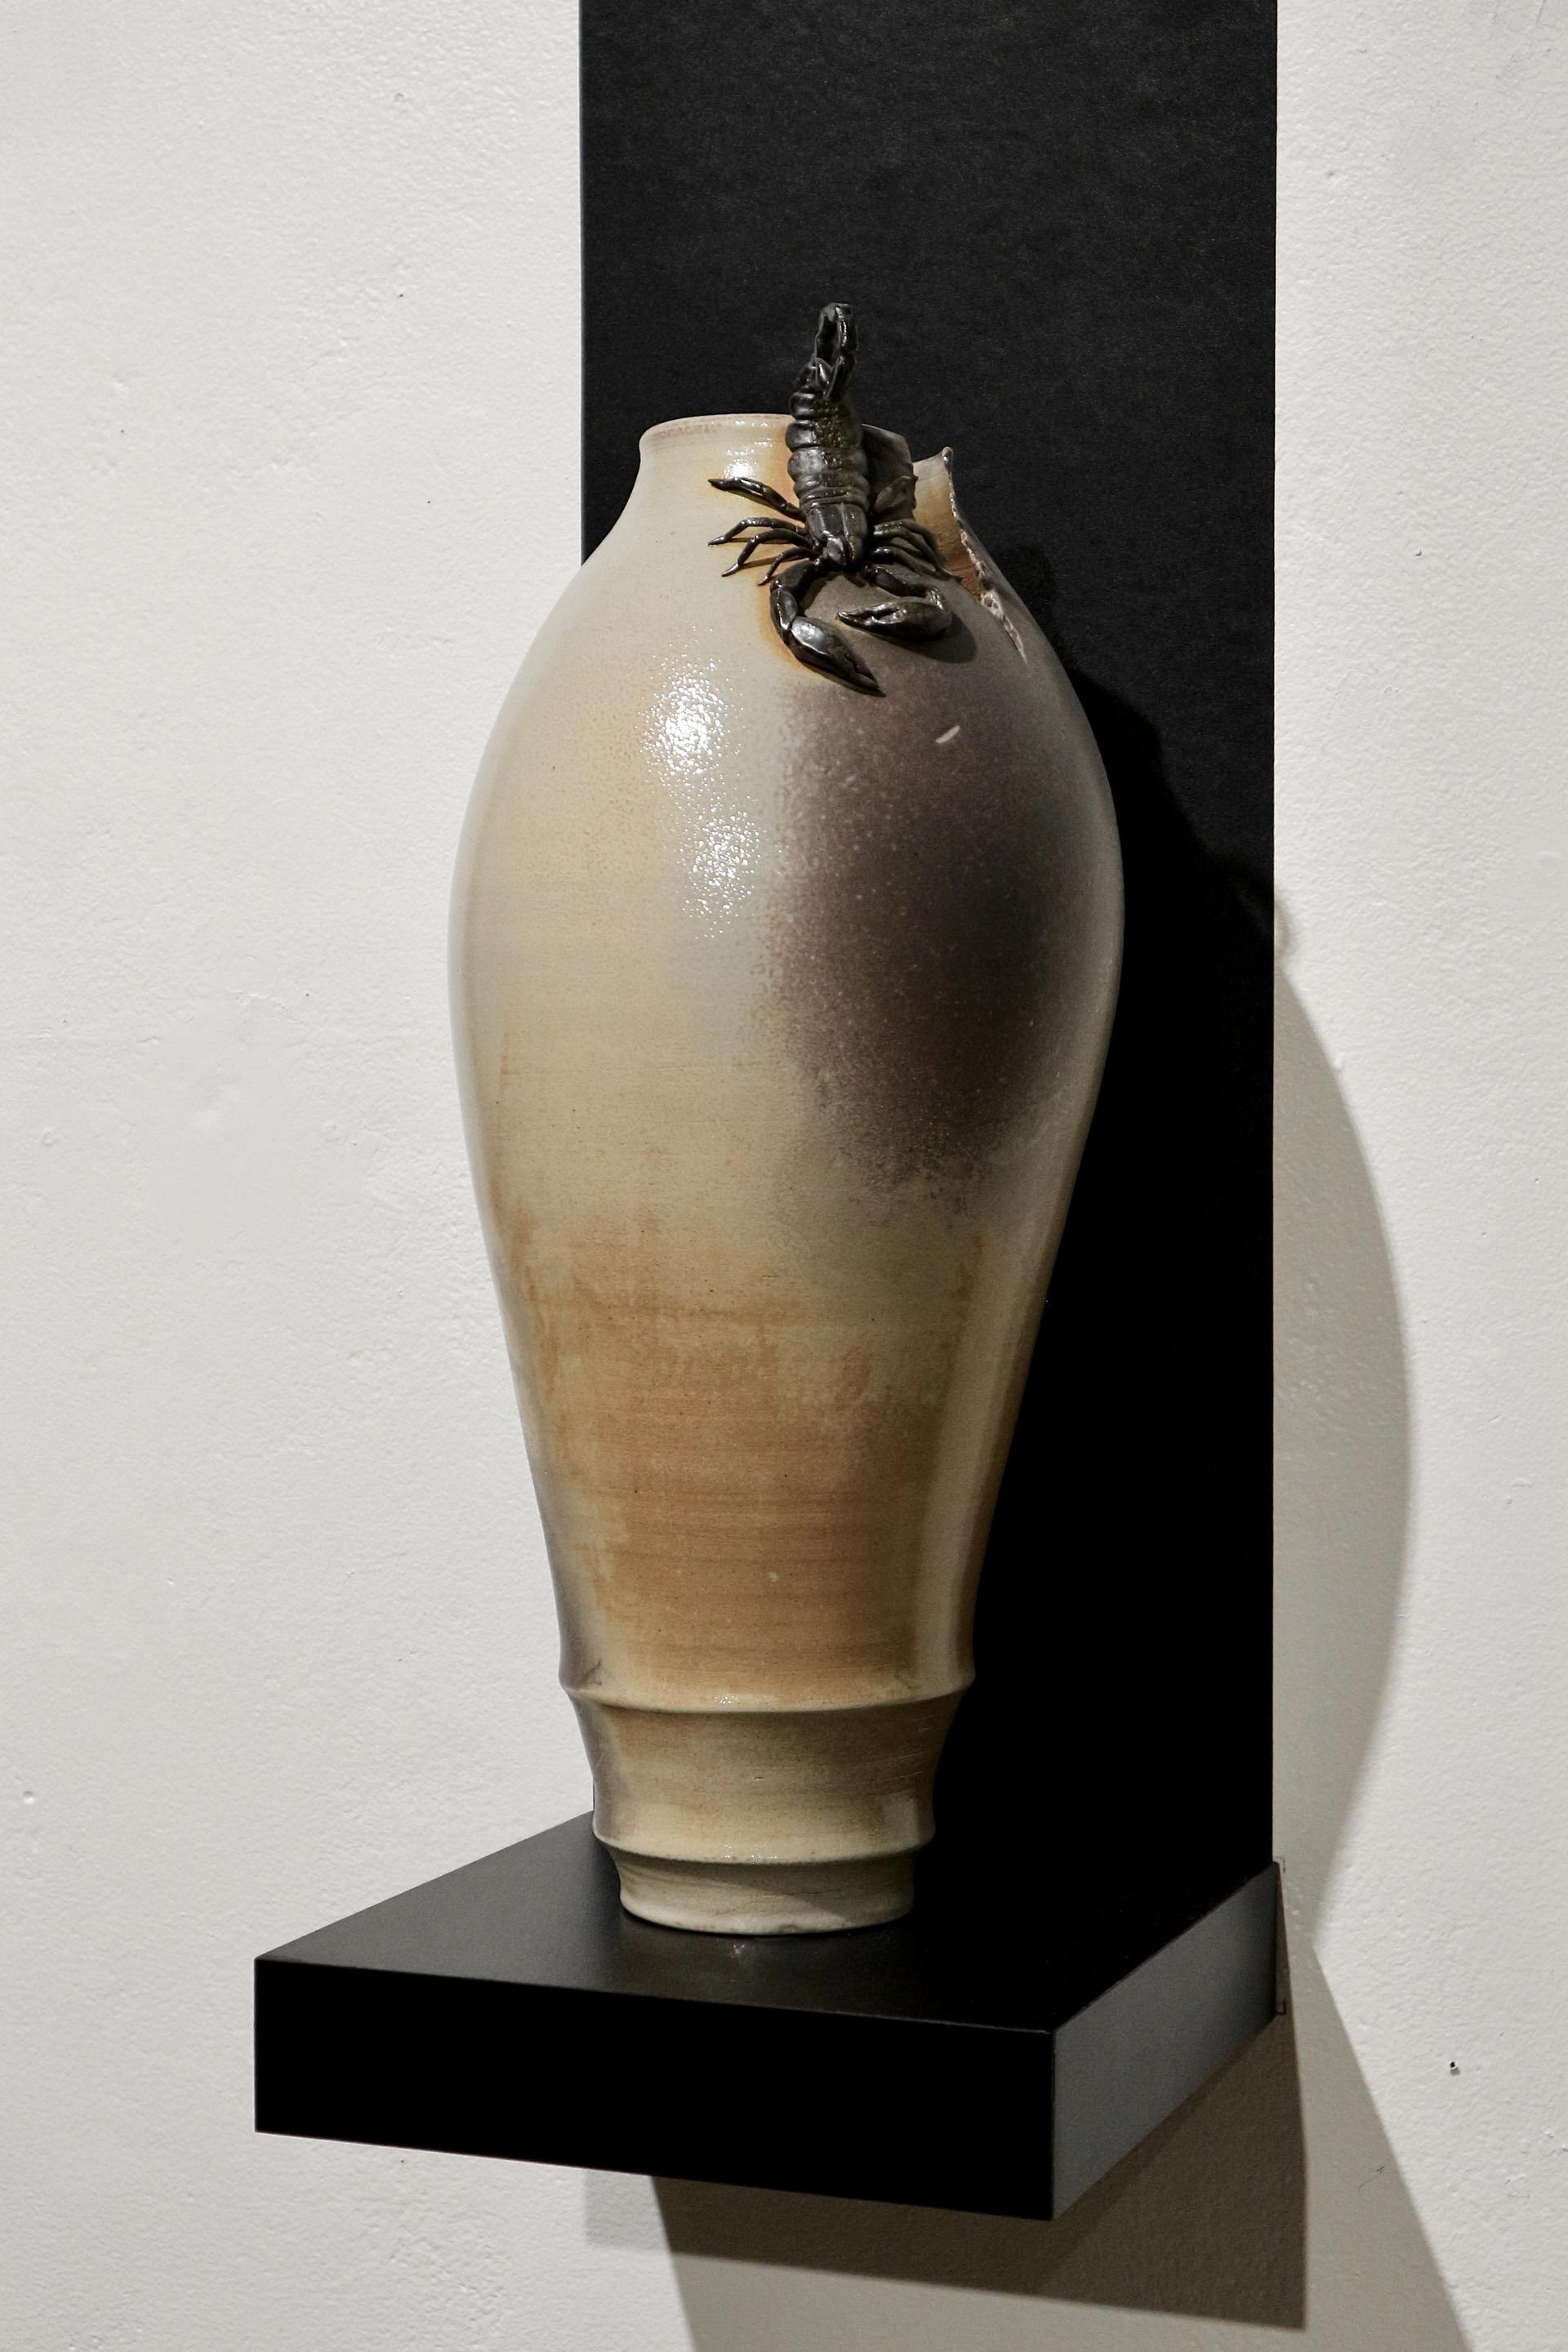 Soda-fired ceramic vessel with hand-sculpted scorpion around the neck.